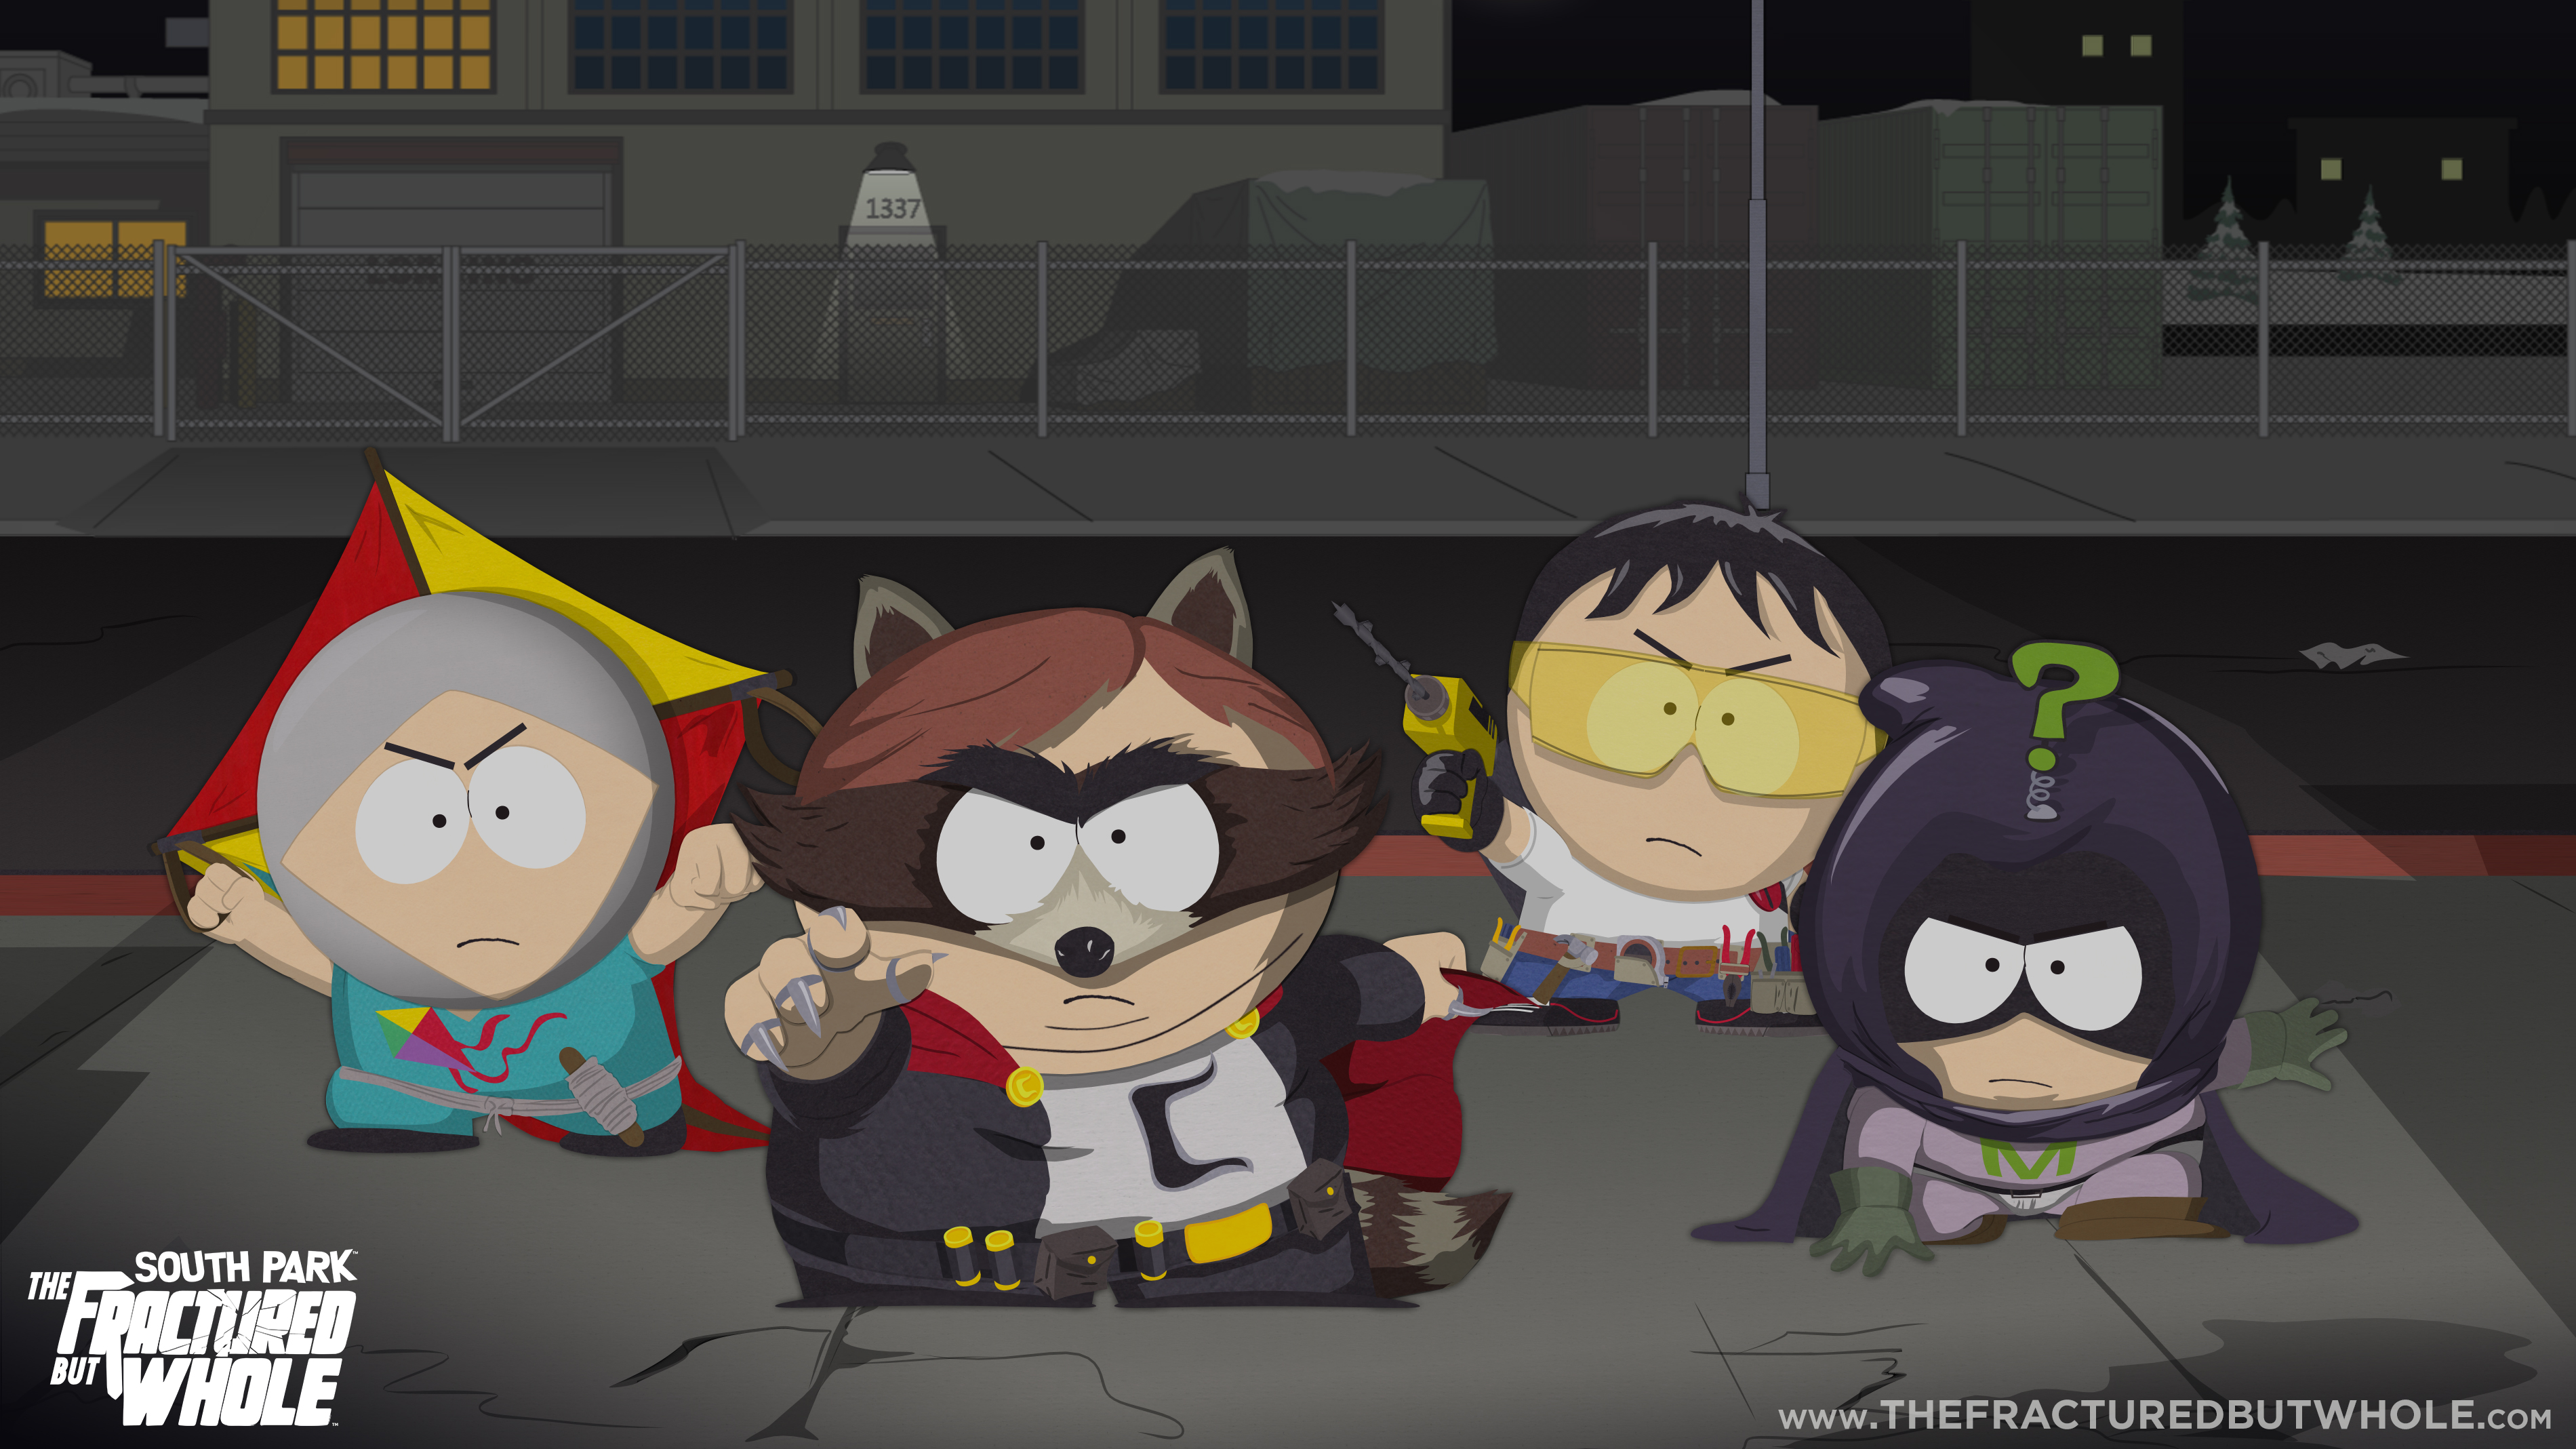 south park the fractured but whole stan - South Park Factured Whole